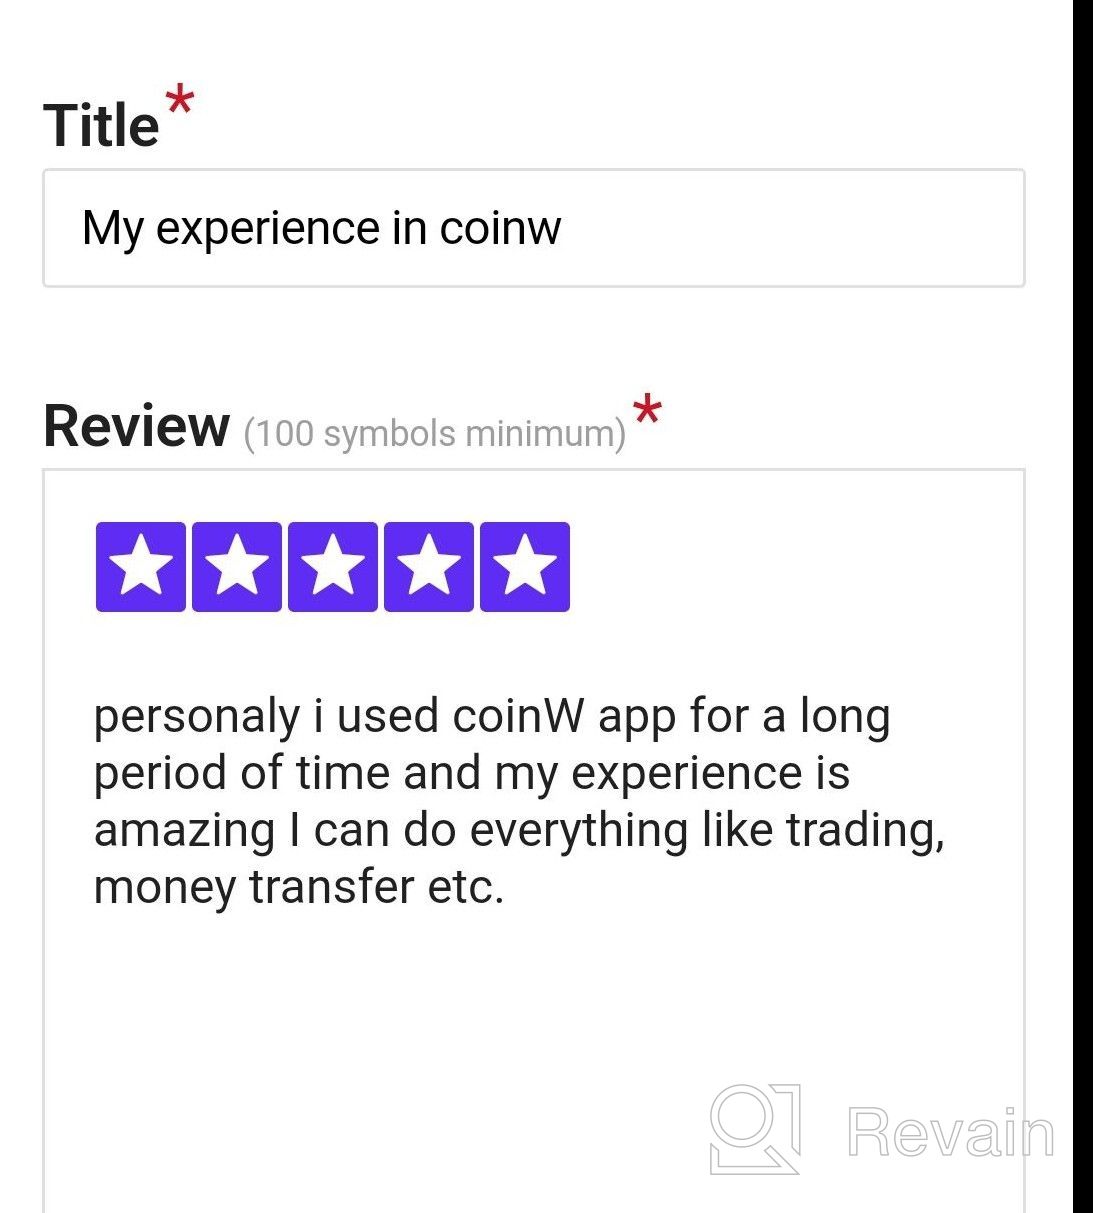 My experience in coinw - 1